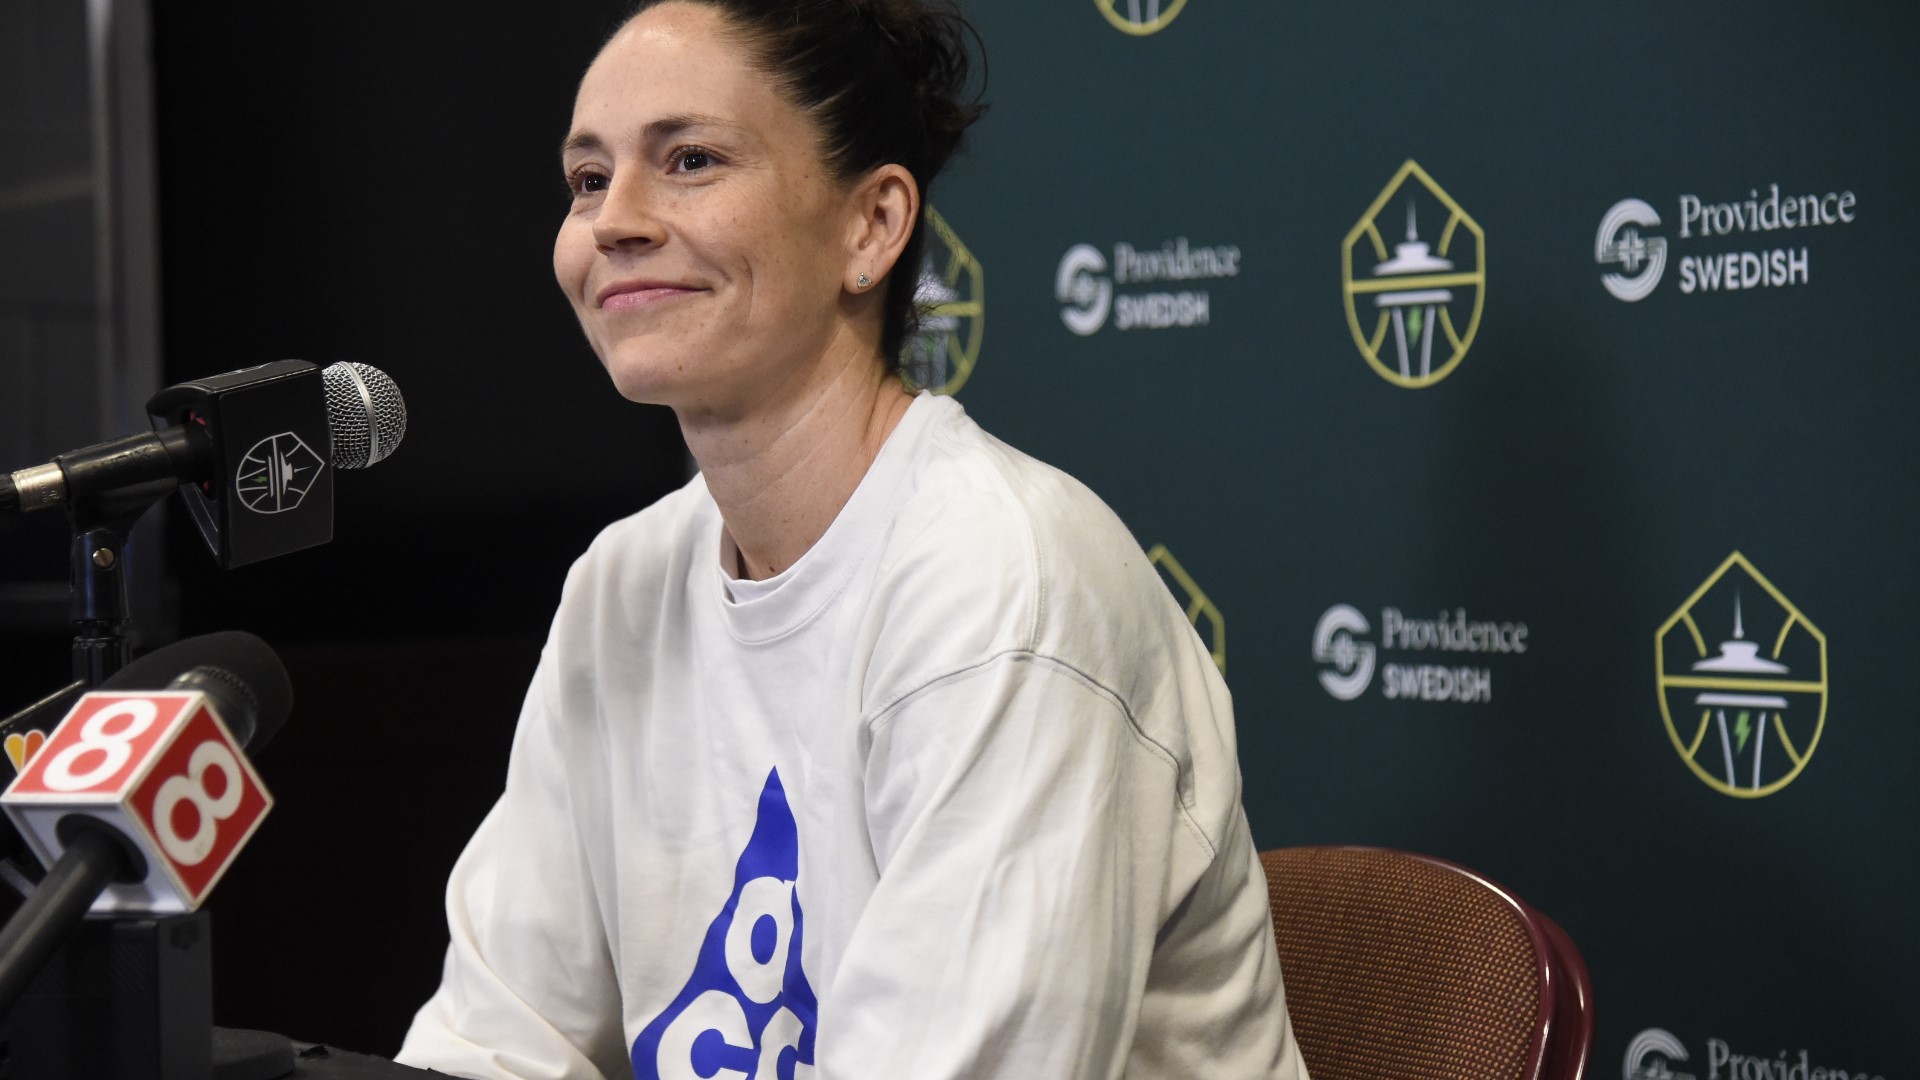 Sue Bird said in a tweet Thursday morning this will be the last season of her 19-year WNBA career.